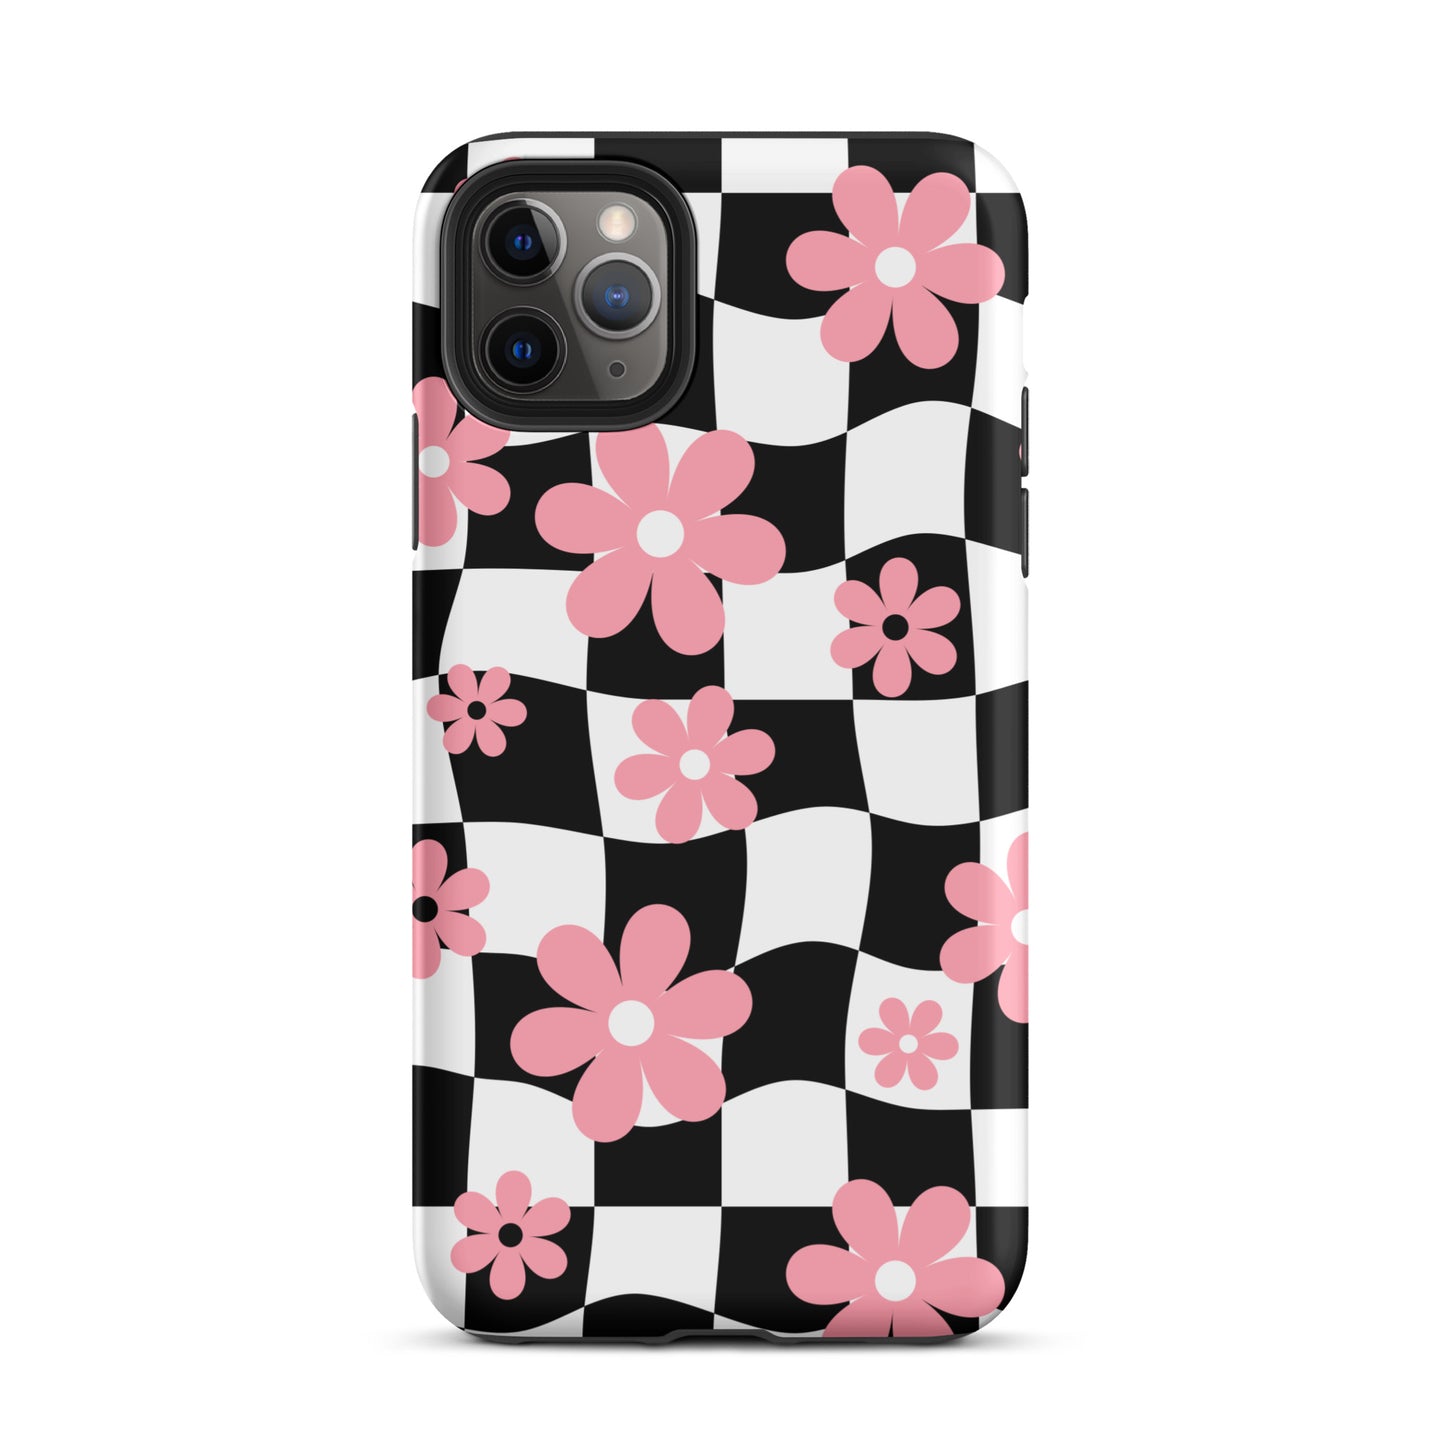 Floral Wavy Checkered iPhone Case iPhone 11 Pro Max Matte